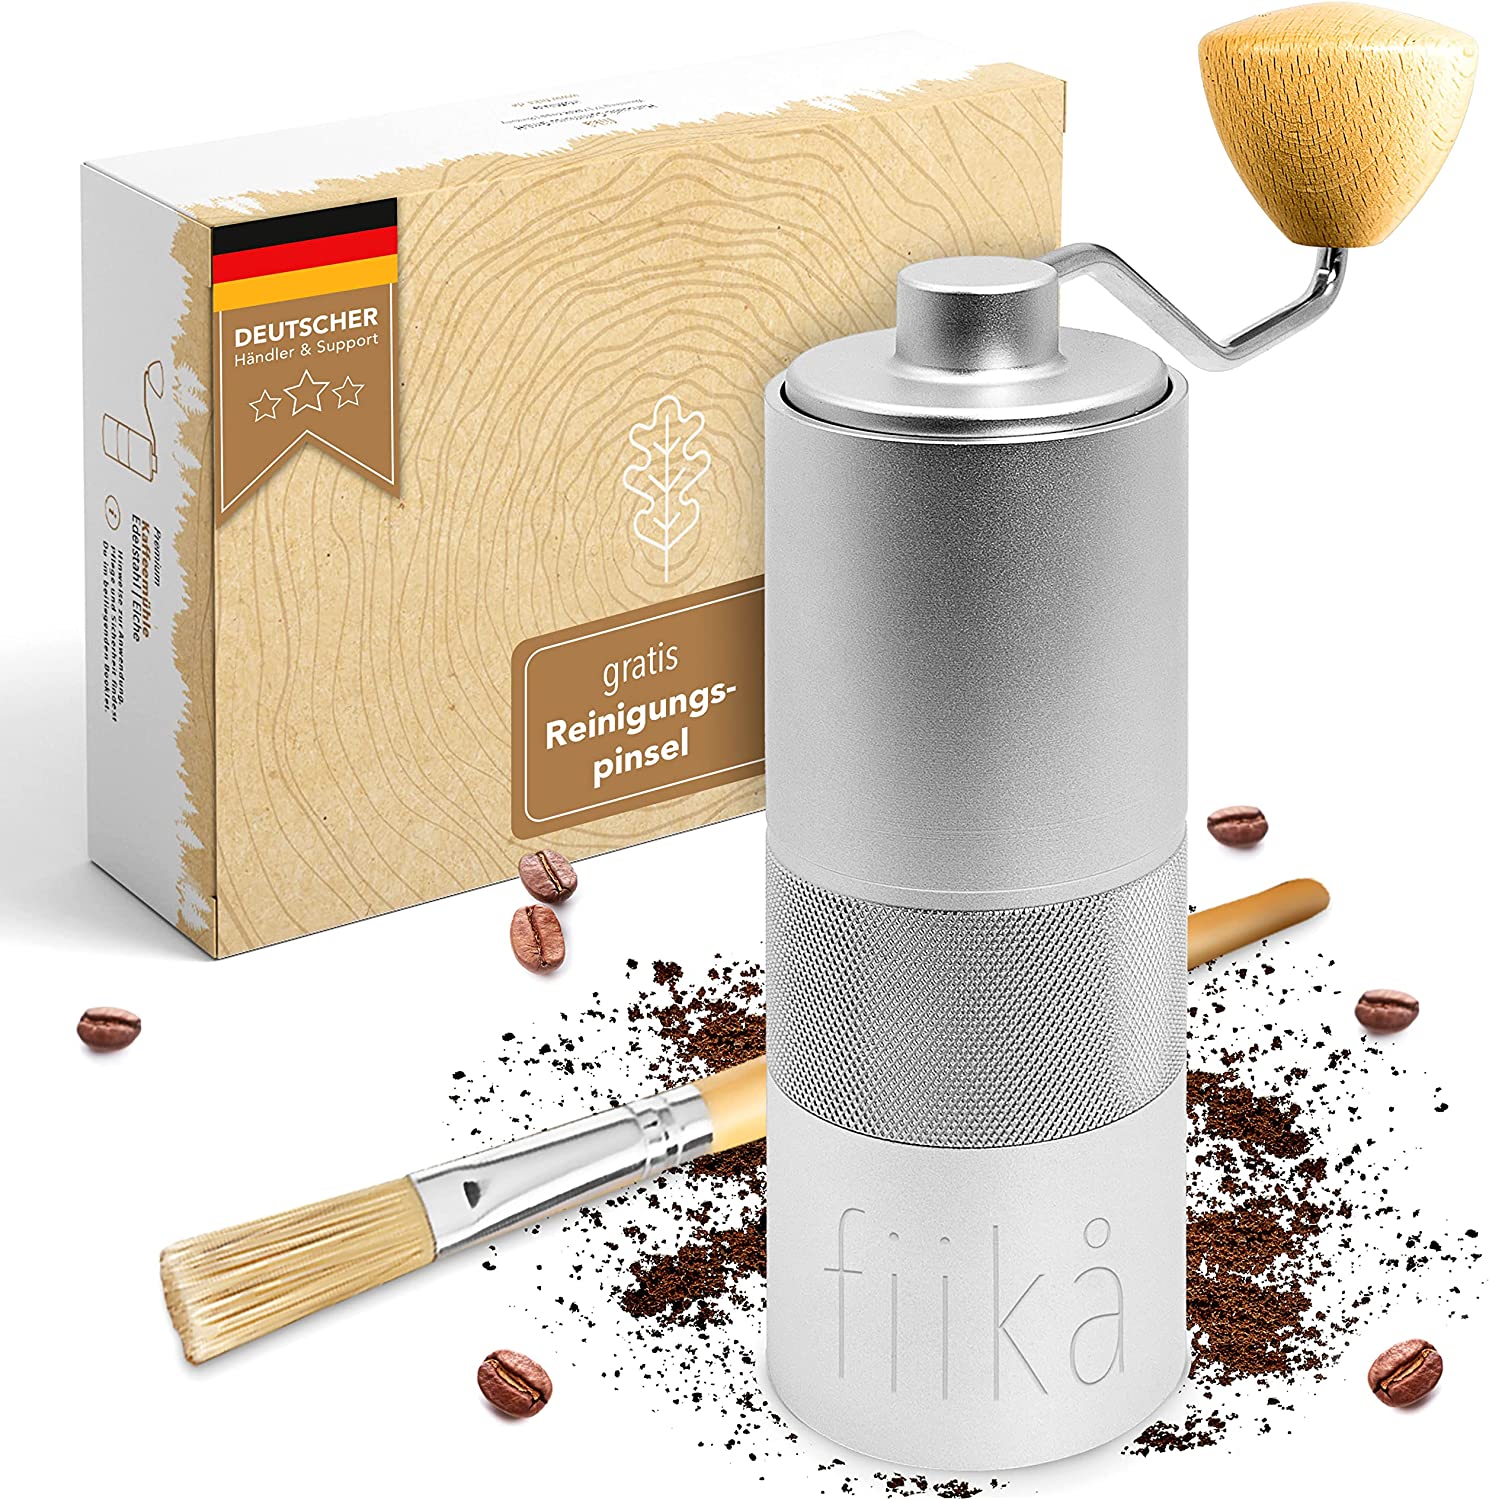 Fiika Manual Coffee Grinder with Stainless Steel Grinder and Removable Wooden - Precise Grinding Adjust, Plastic -Free Espresso with Cone Grinder and Cleaning Brush + Booklet